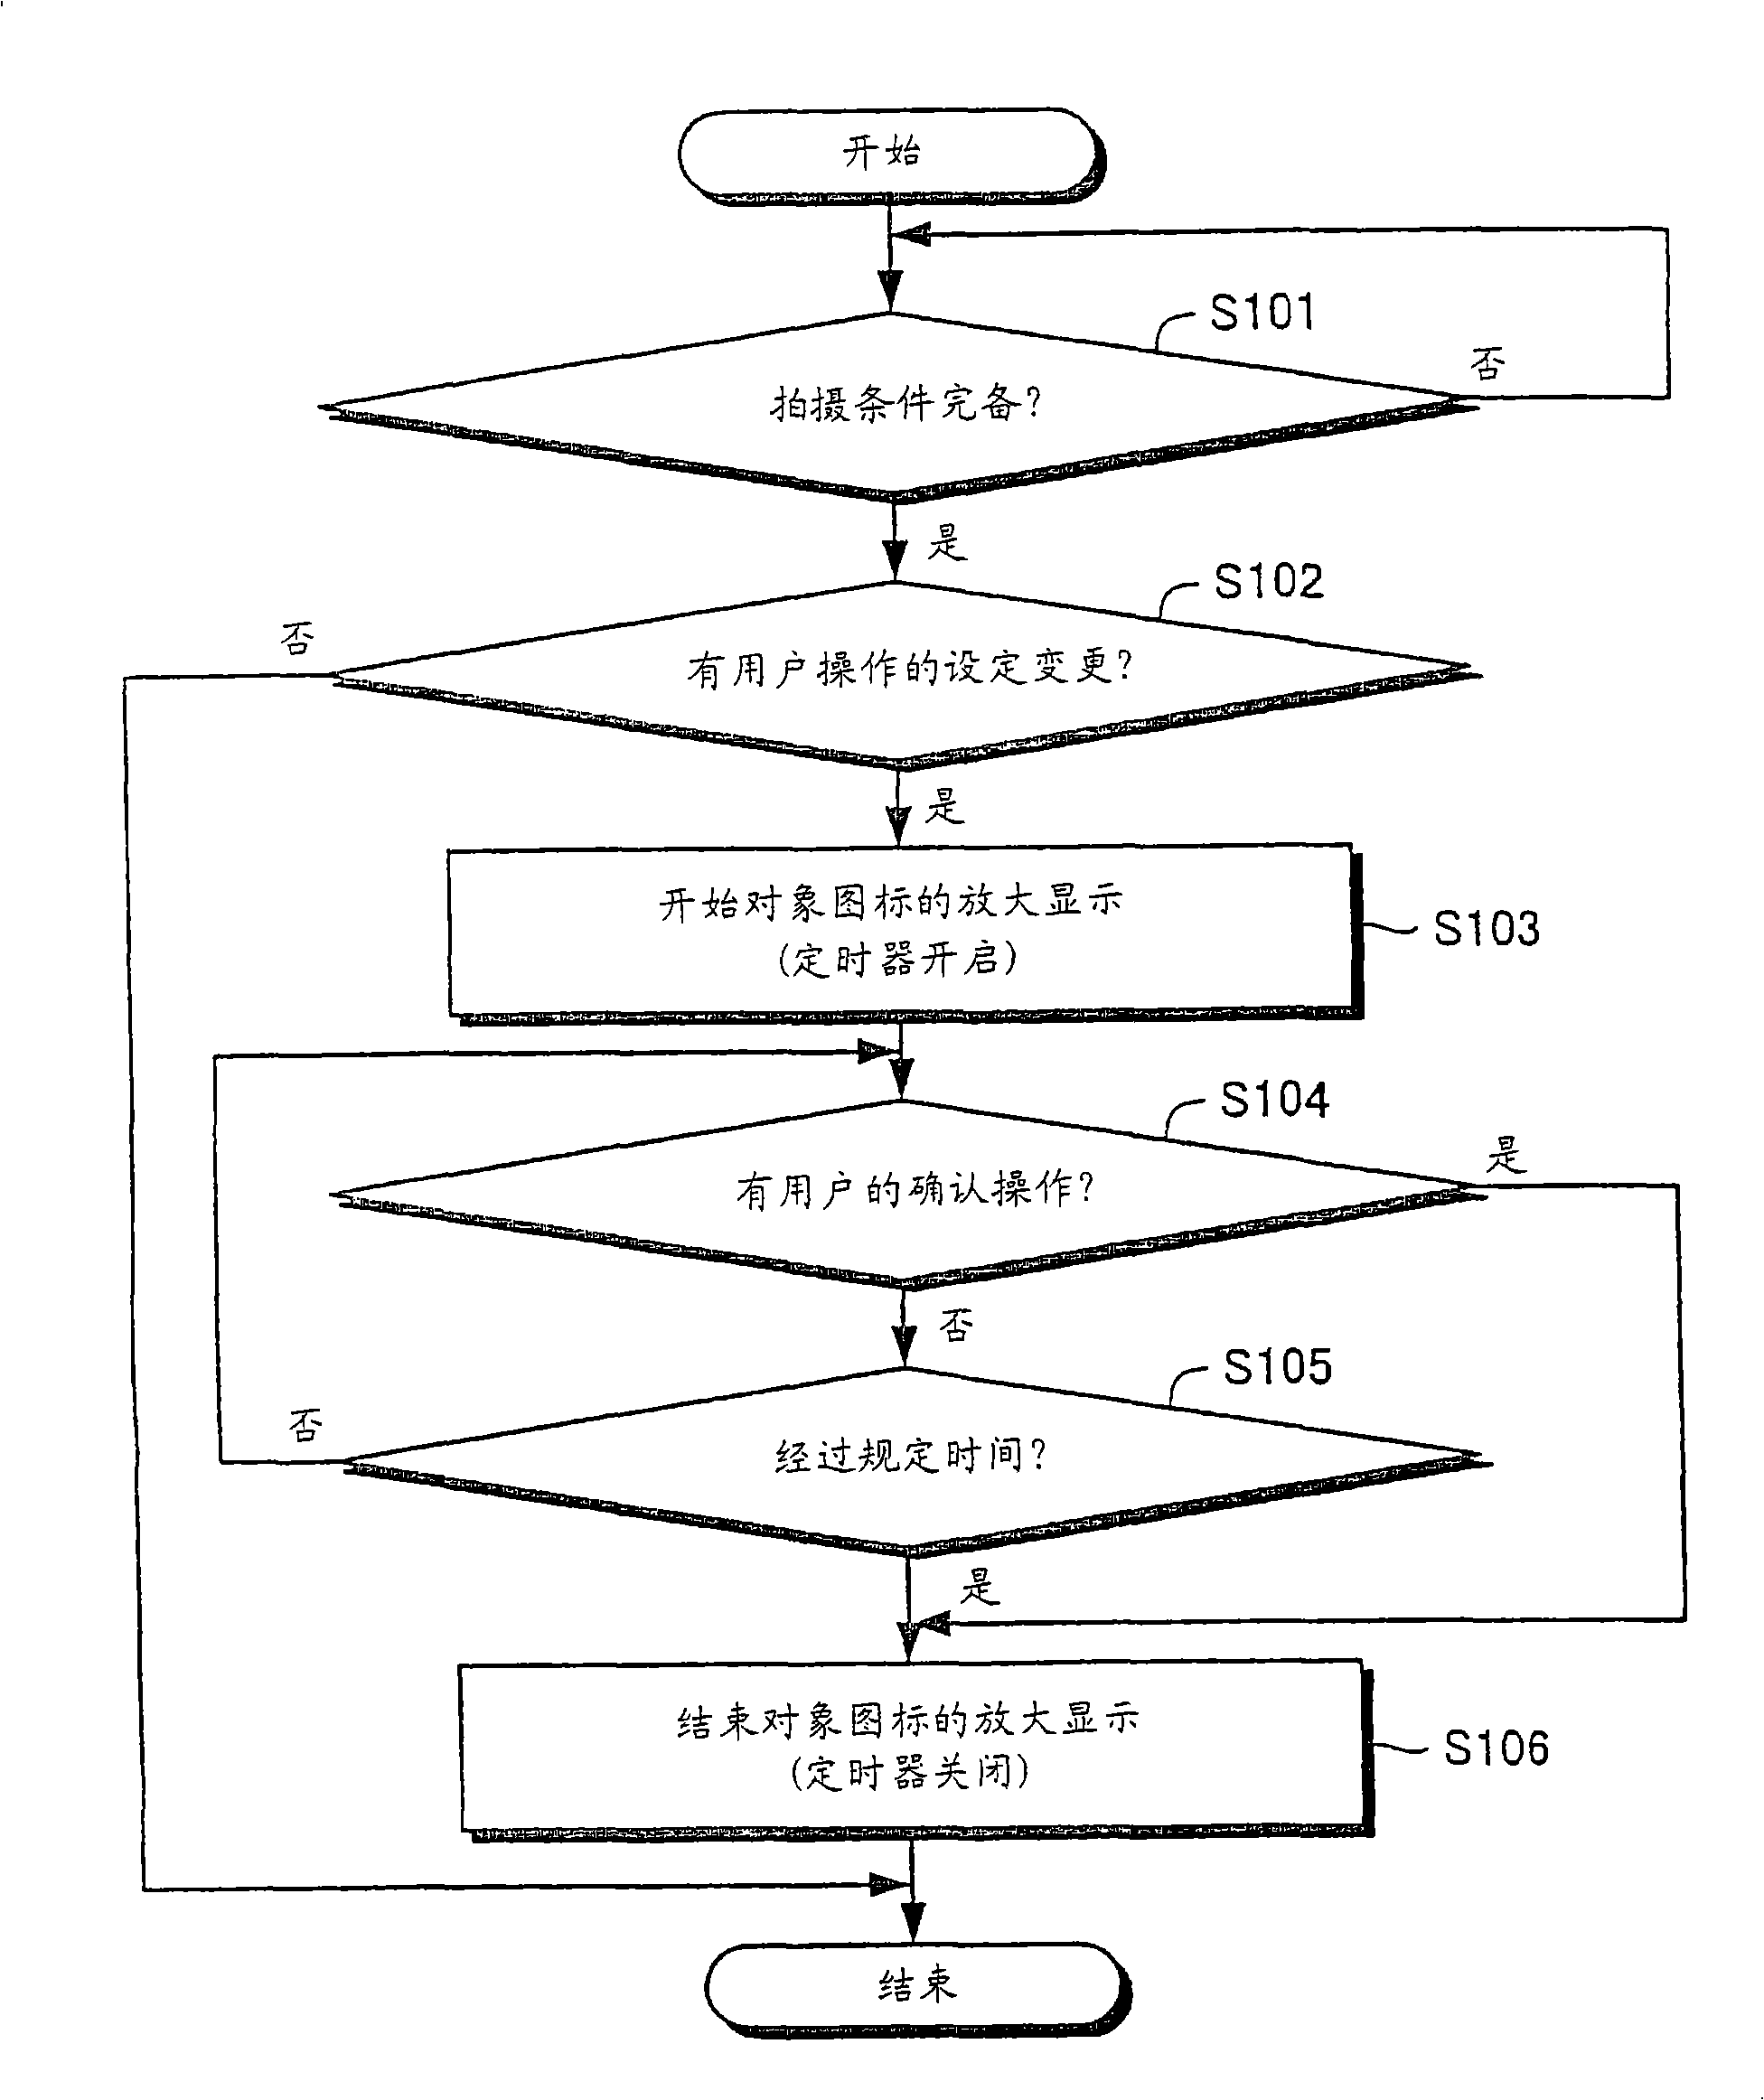 Electronic apparatus with display unit, information-processing method, and program for making computer execute the same method